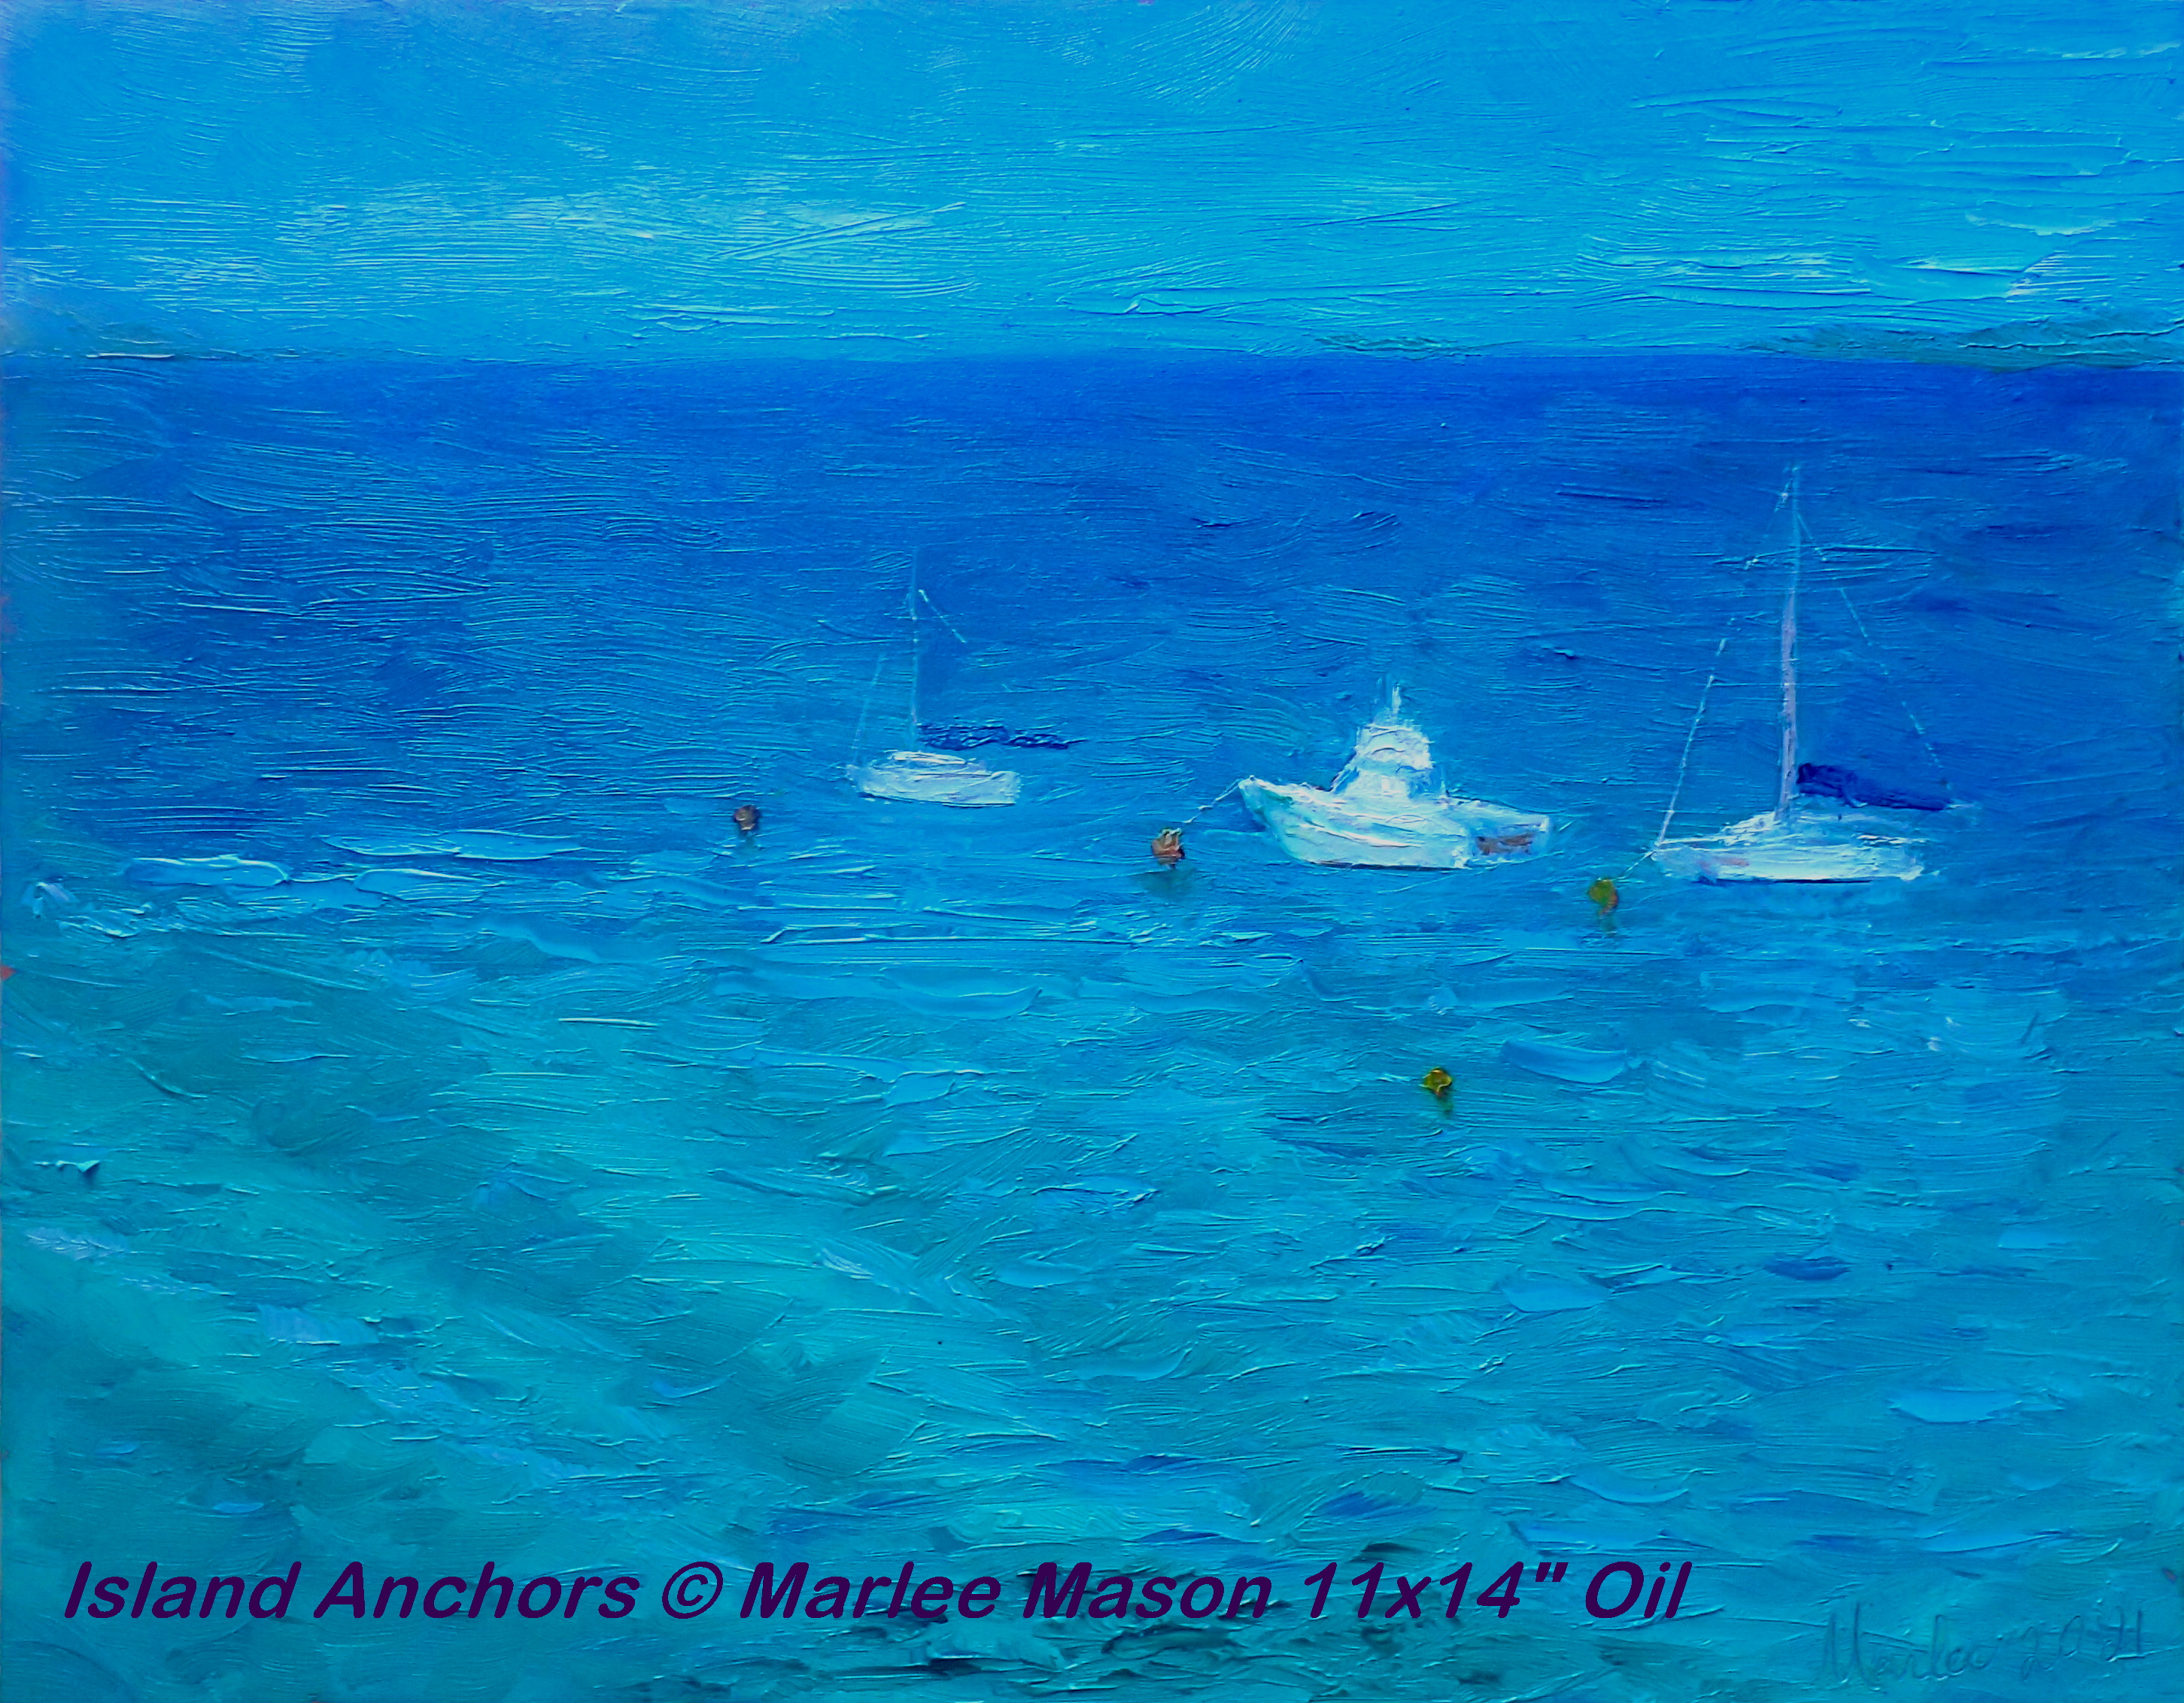 Original Oil on Canvas11x14"    With the return of autumn breezes in early November the Abaco Island see a return of cruisers making their journey further south to explore one of many Bahamian islands